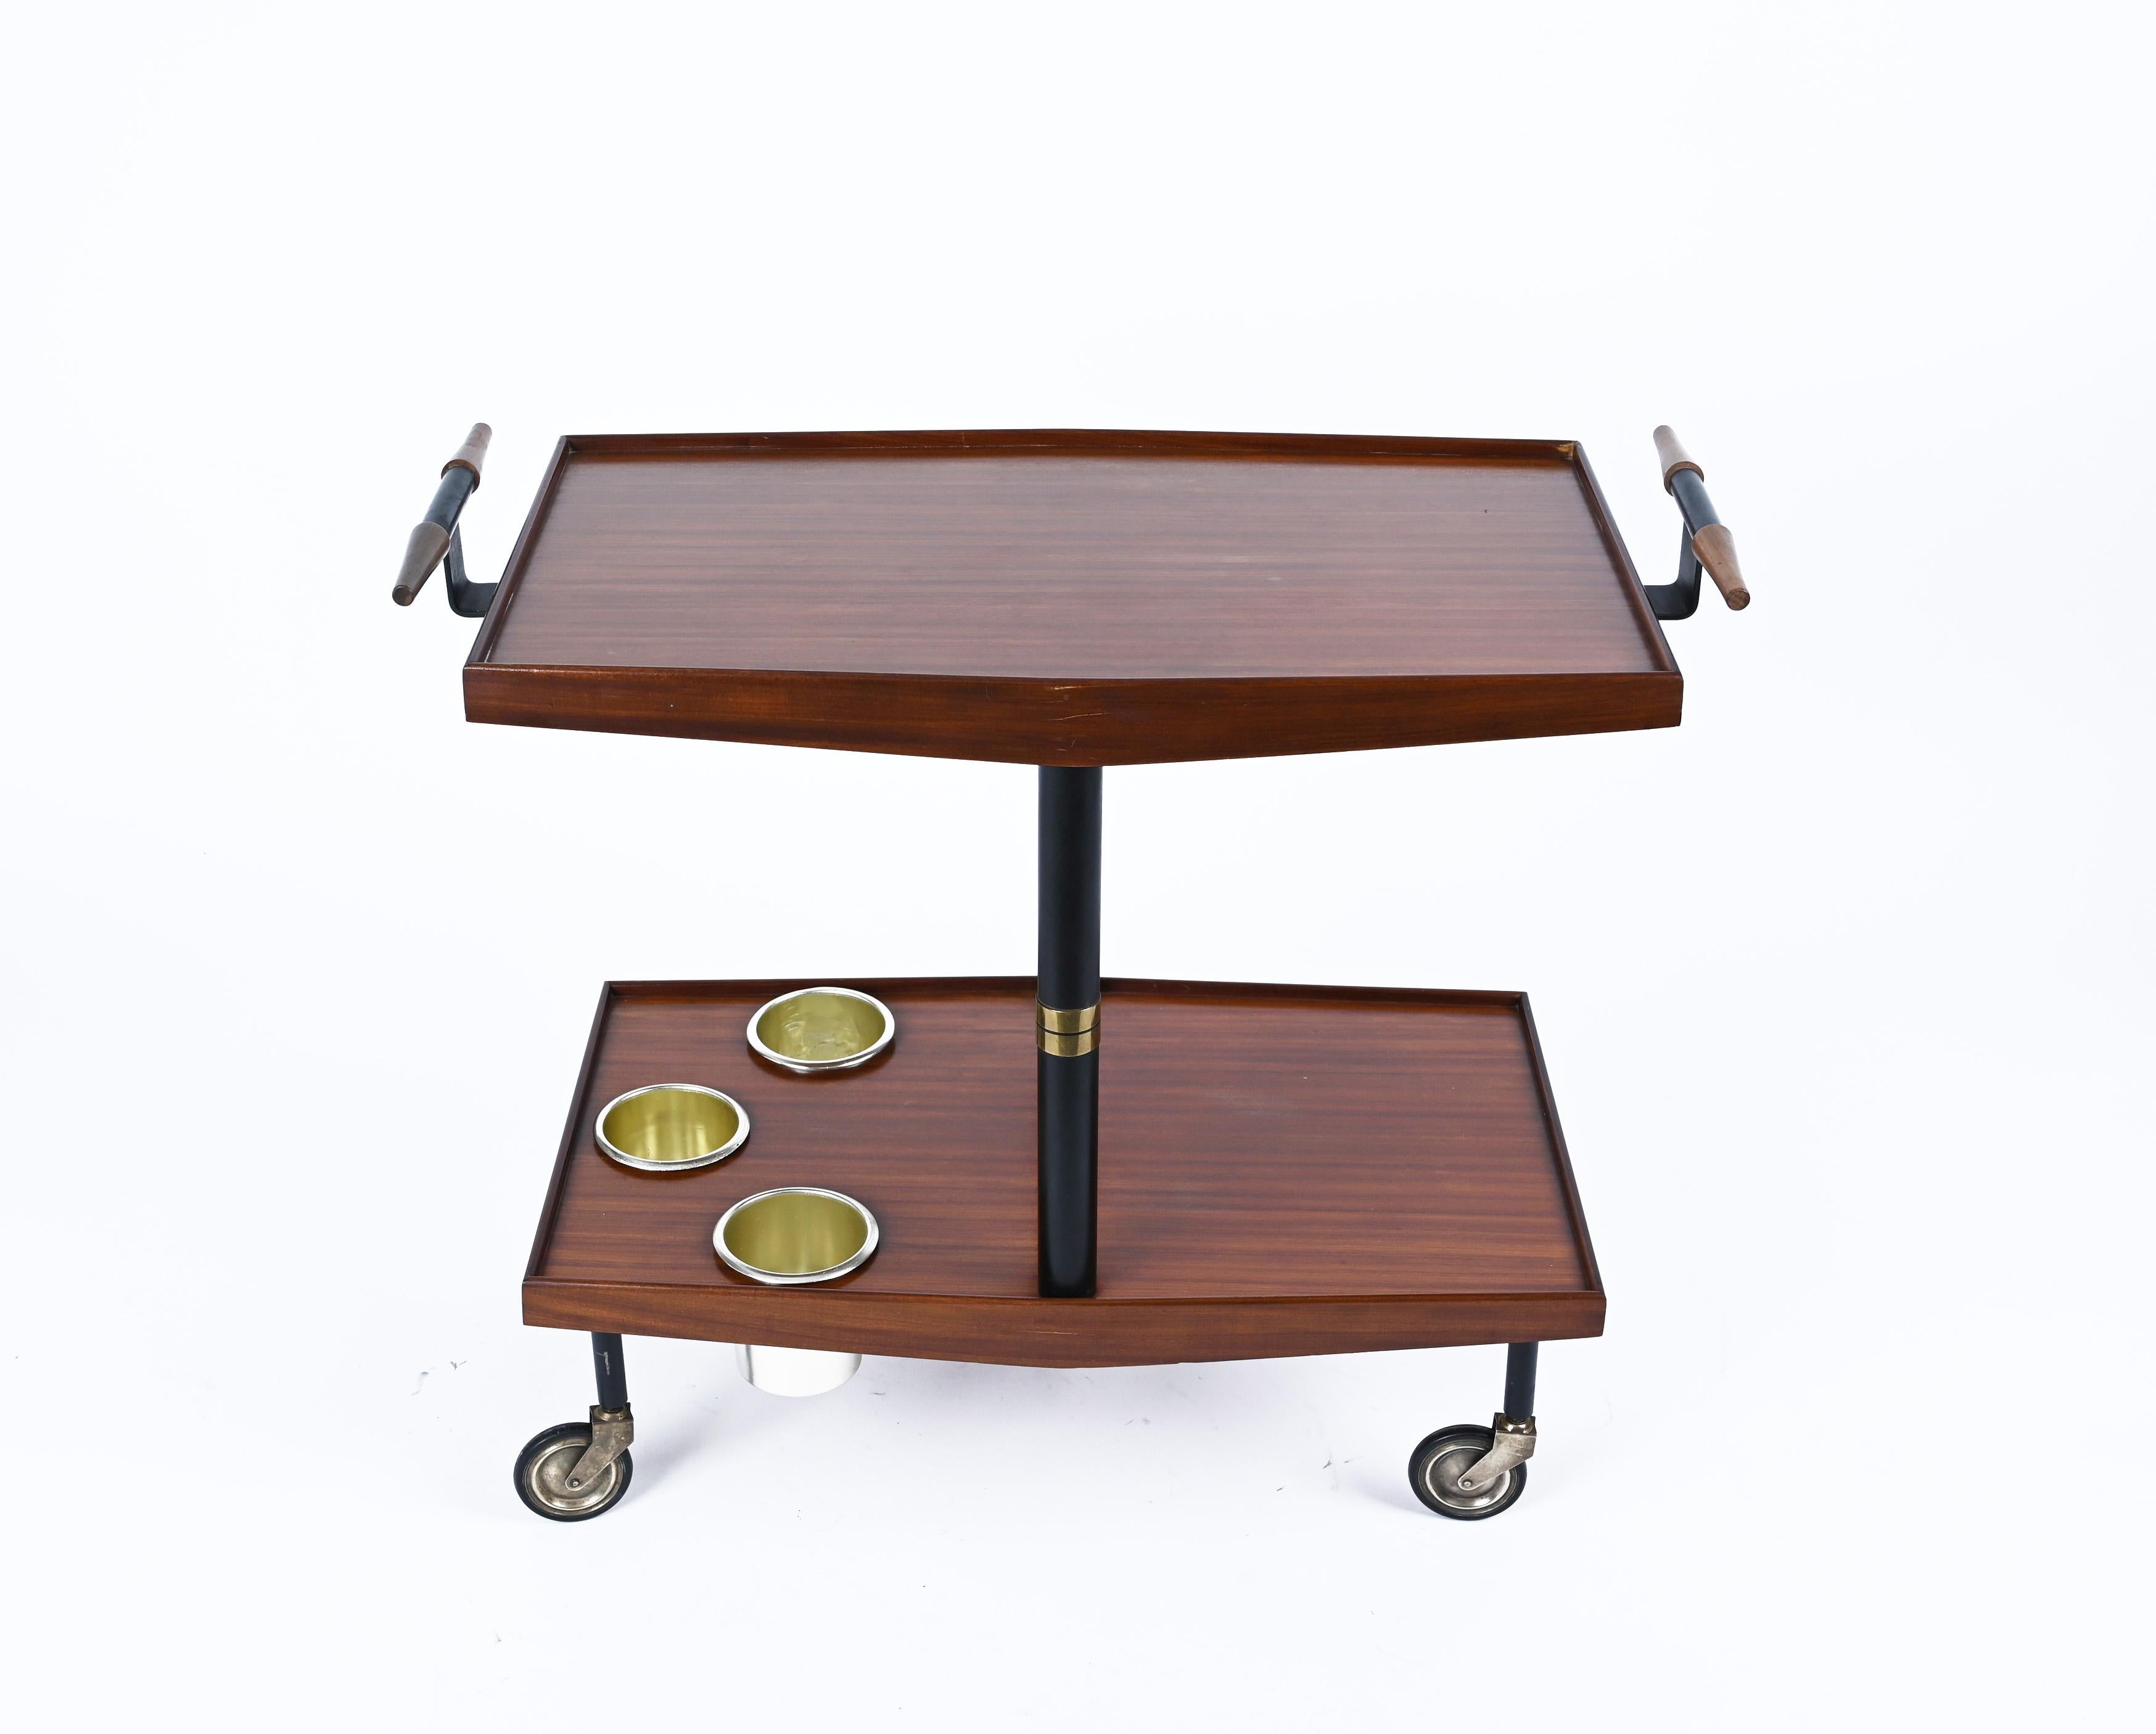 Italian Midcentury Wood Brass and Enameled Metal Serving Bar Cart and Bottle Holder 1960 For Sale